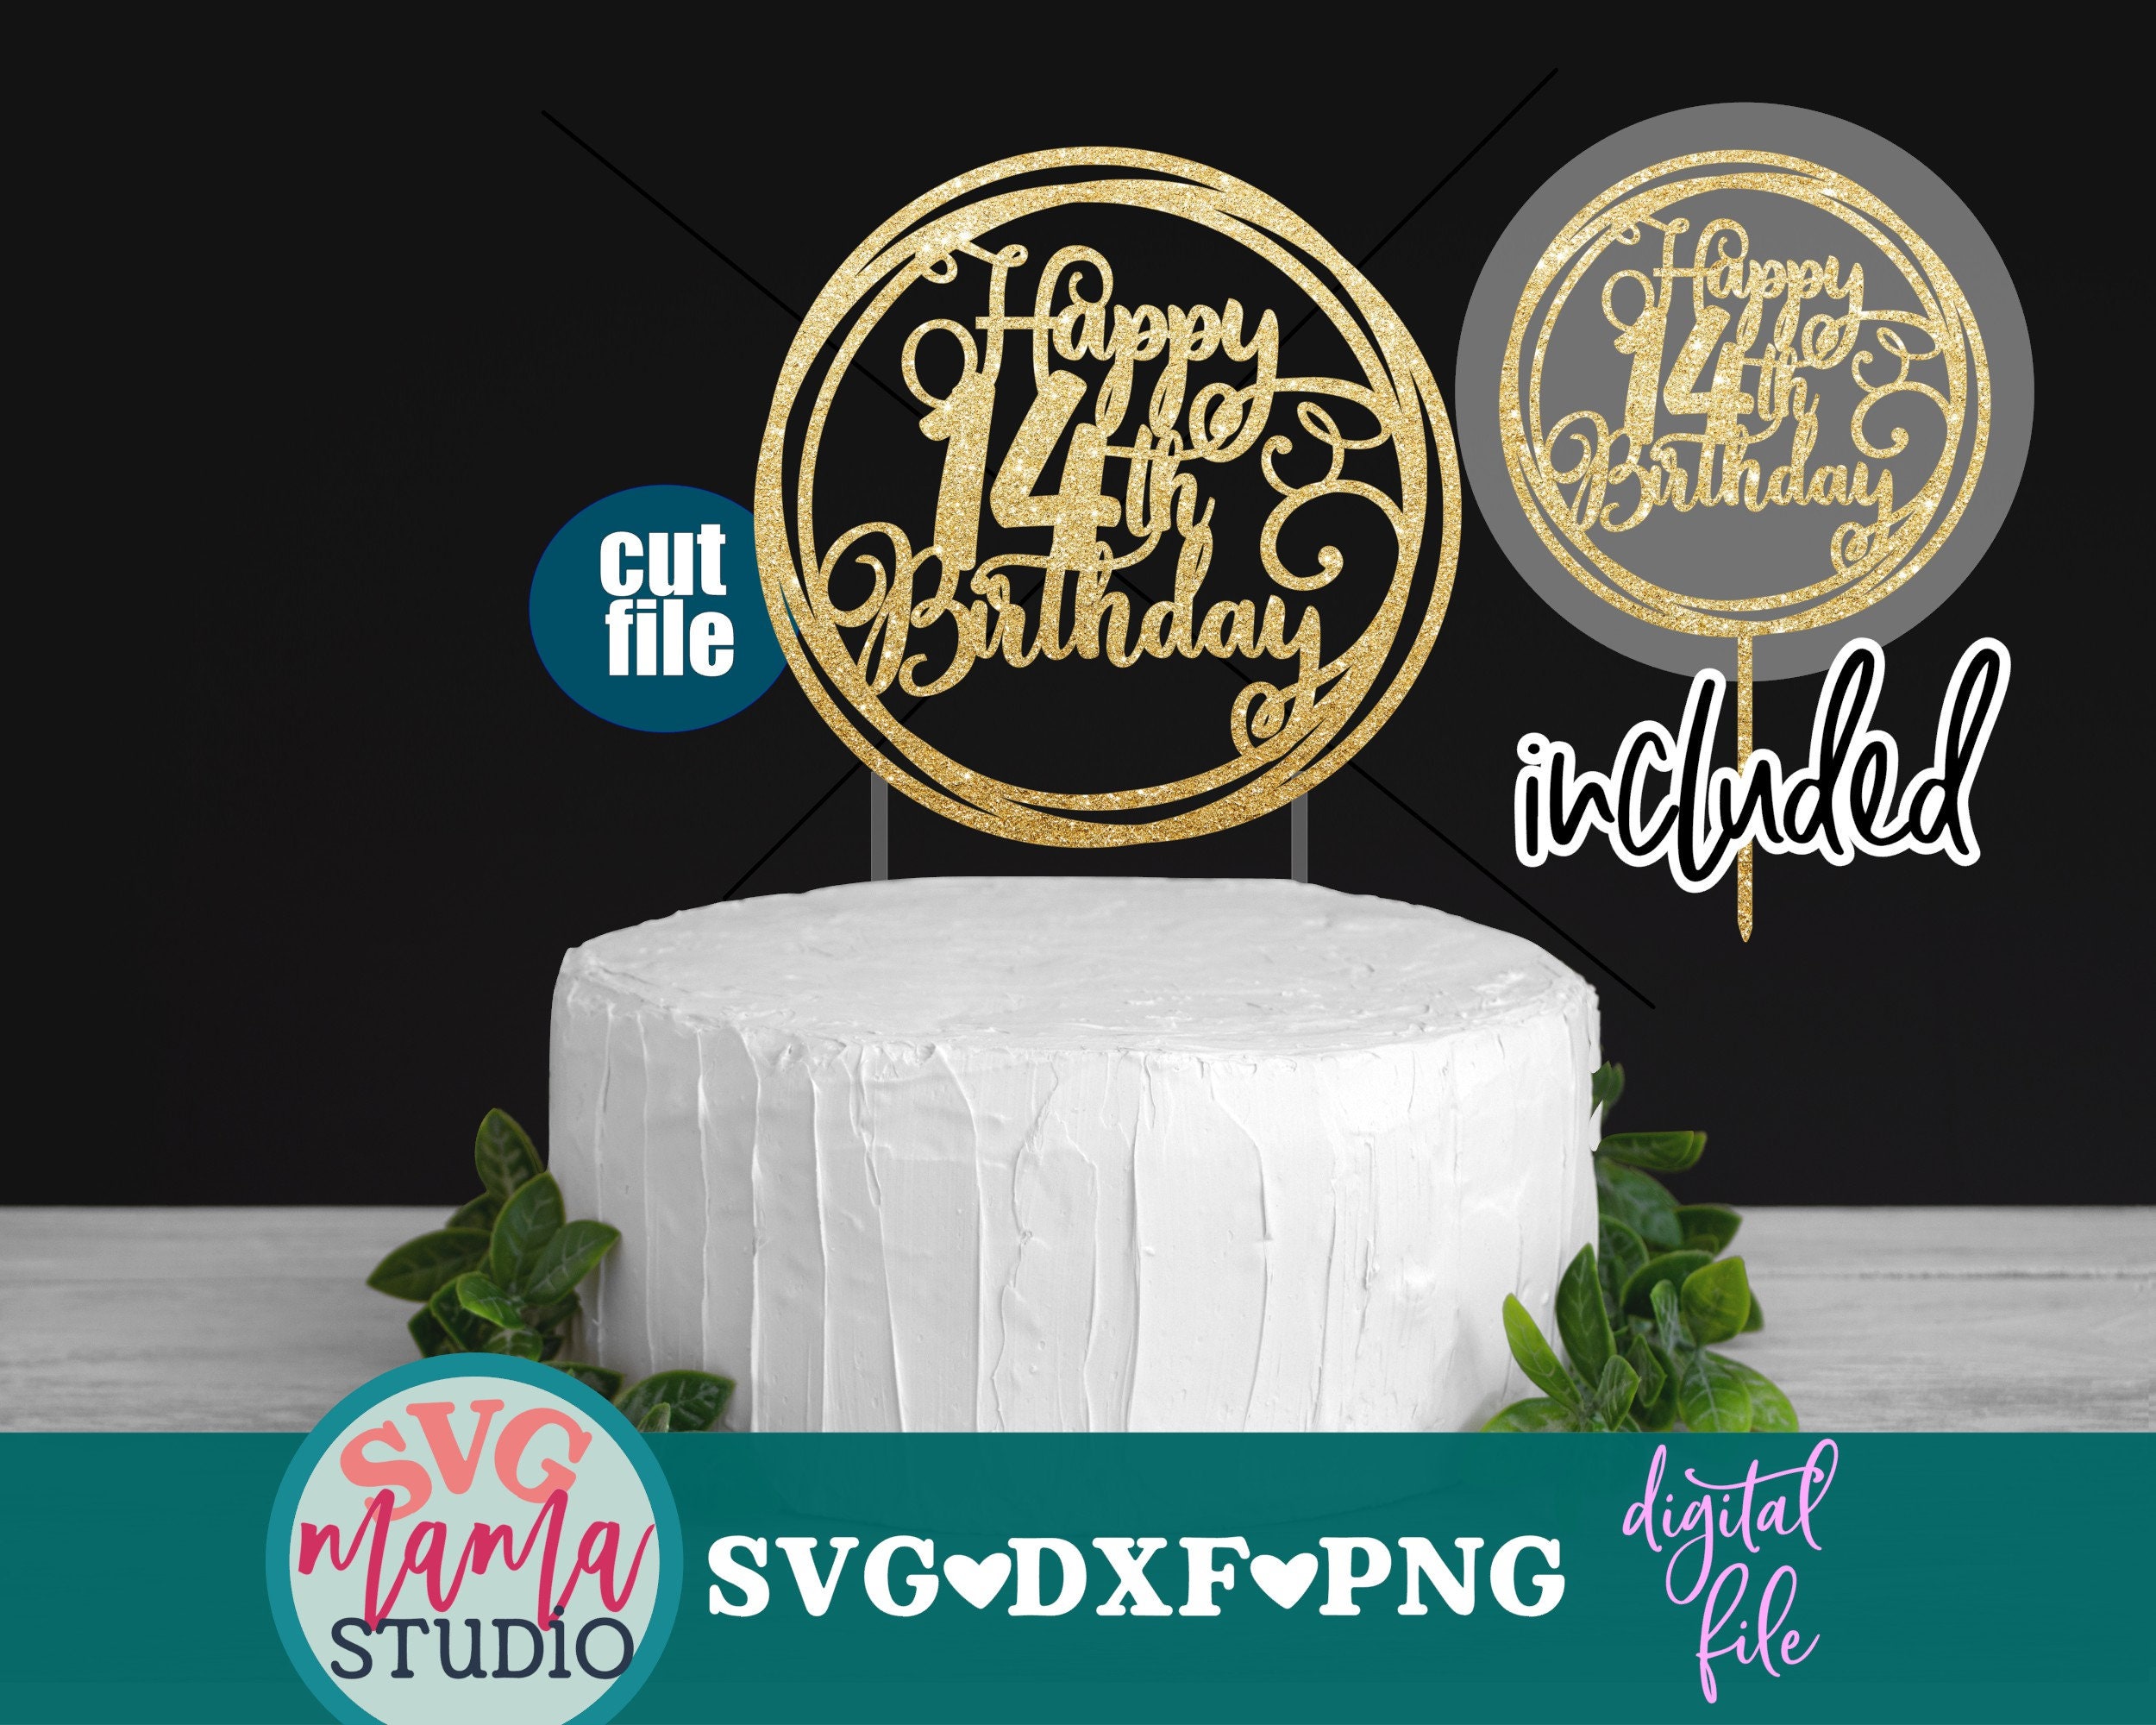 Ediblektoppers Harry Personalized Cake Toppers 14 8.5 x 11.5 Inches Birthday Cake Topper